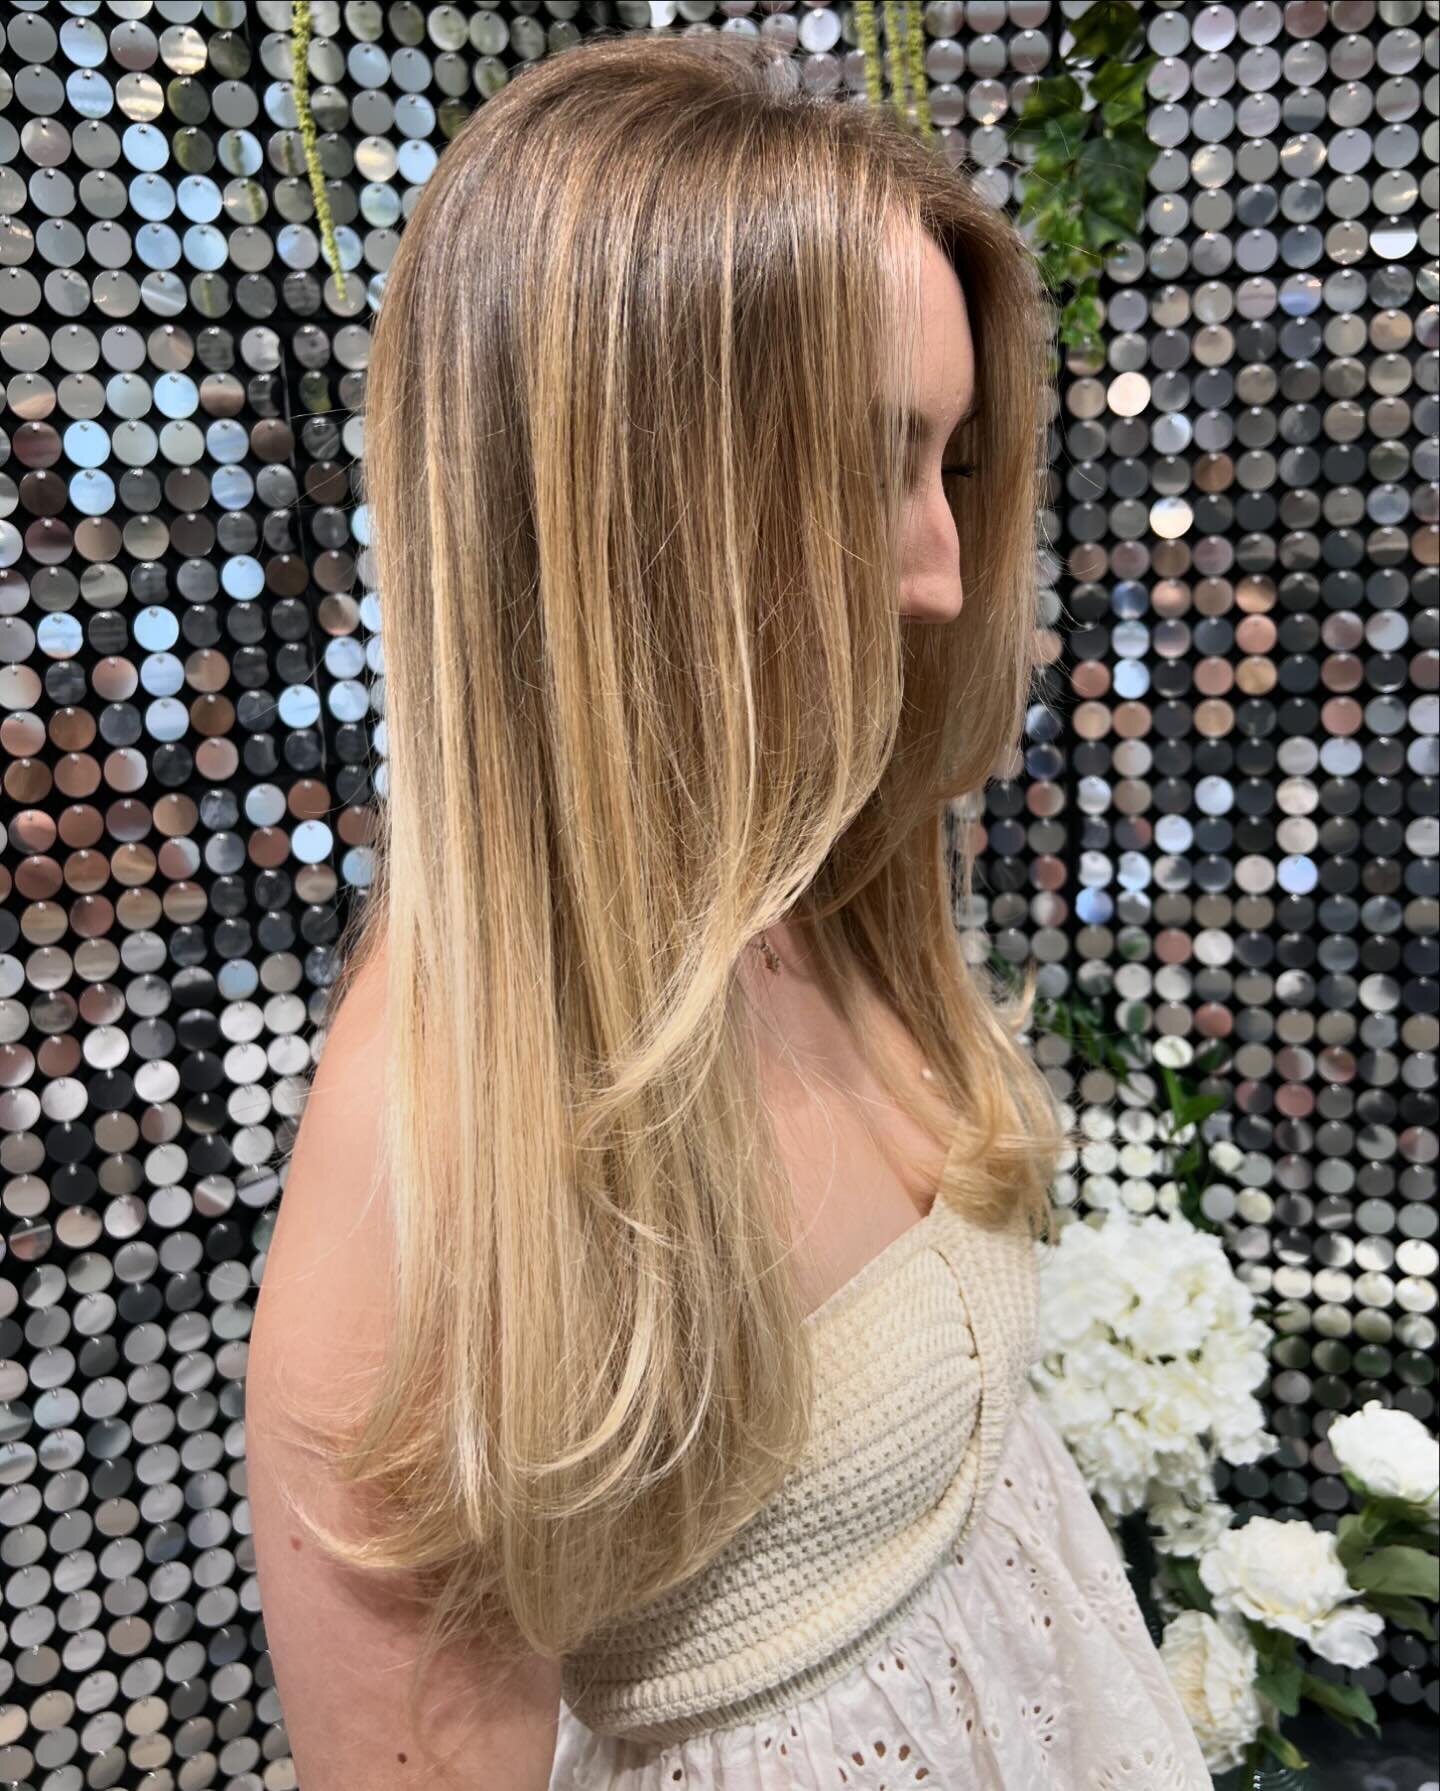 Not always a bouncy blow-dry day - we also do smooth, straight blowdries. The perfect amount of volume, and movement. 💫 

Styled by Anderson.